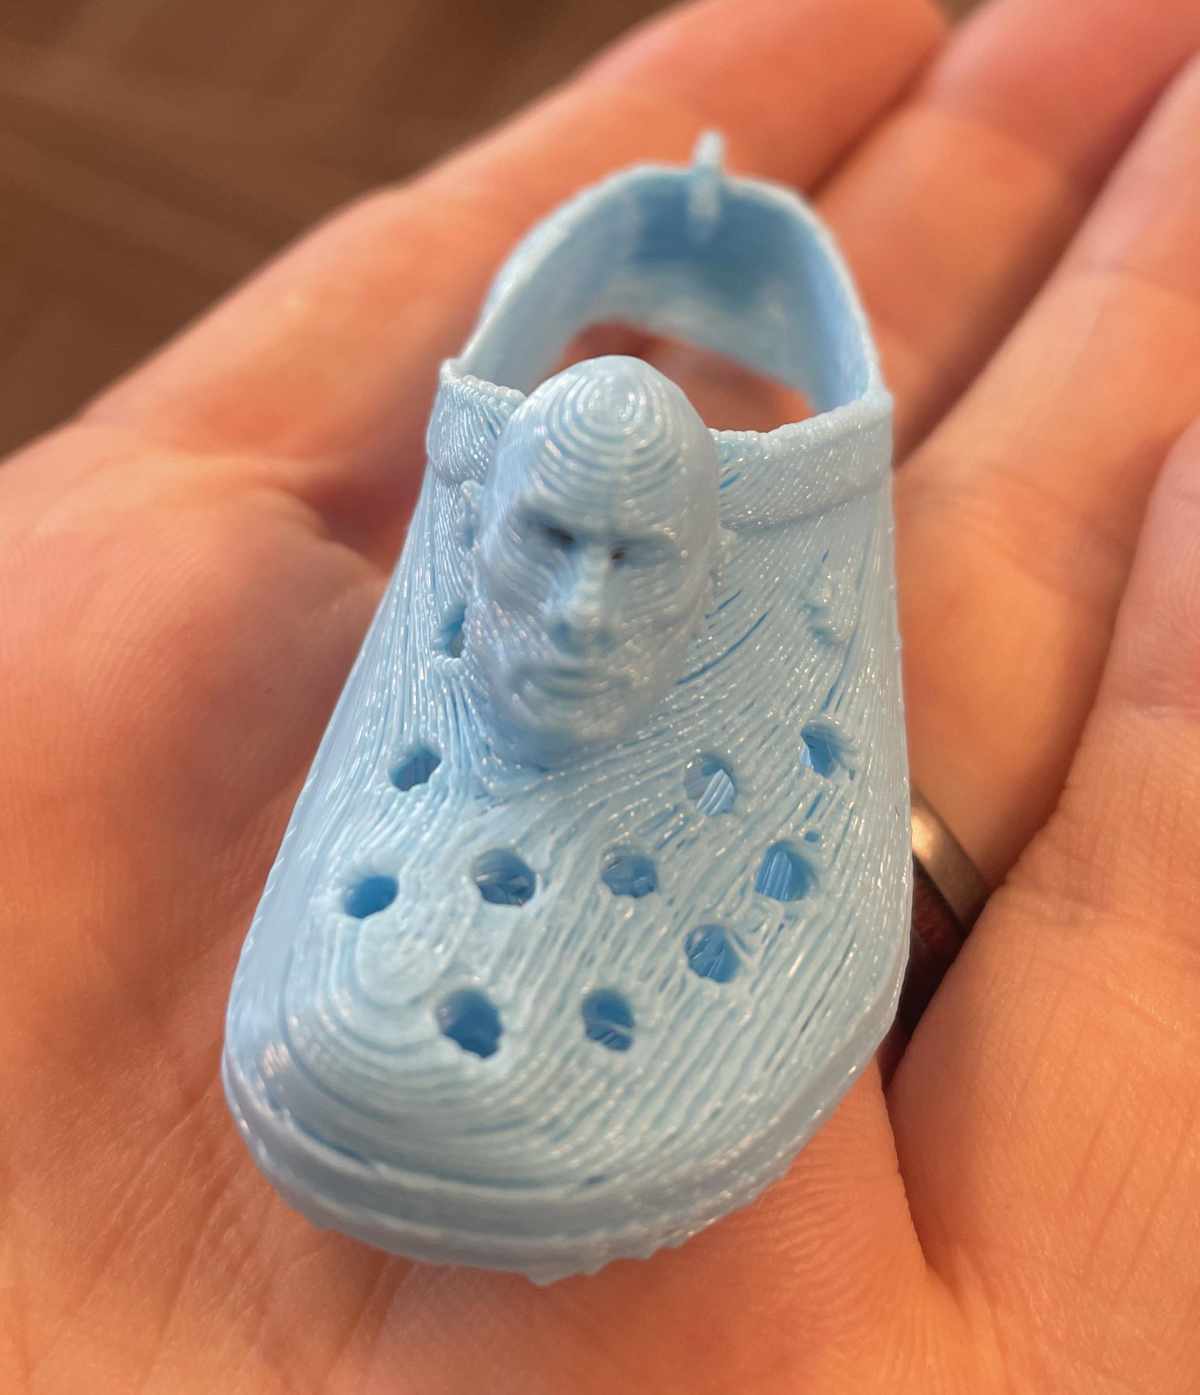 My students are carrying around 3D printed Dwayne the Crock Johnsons